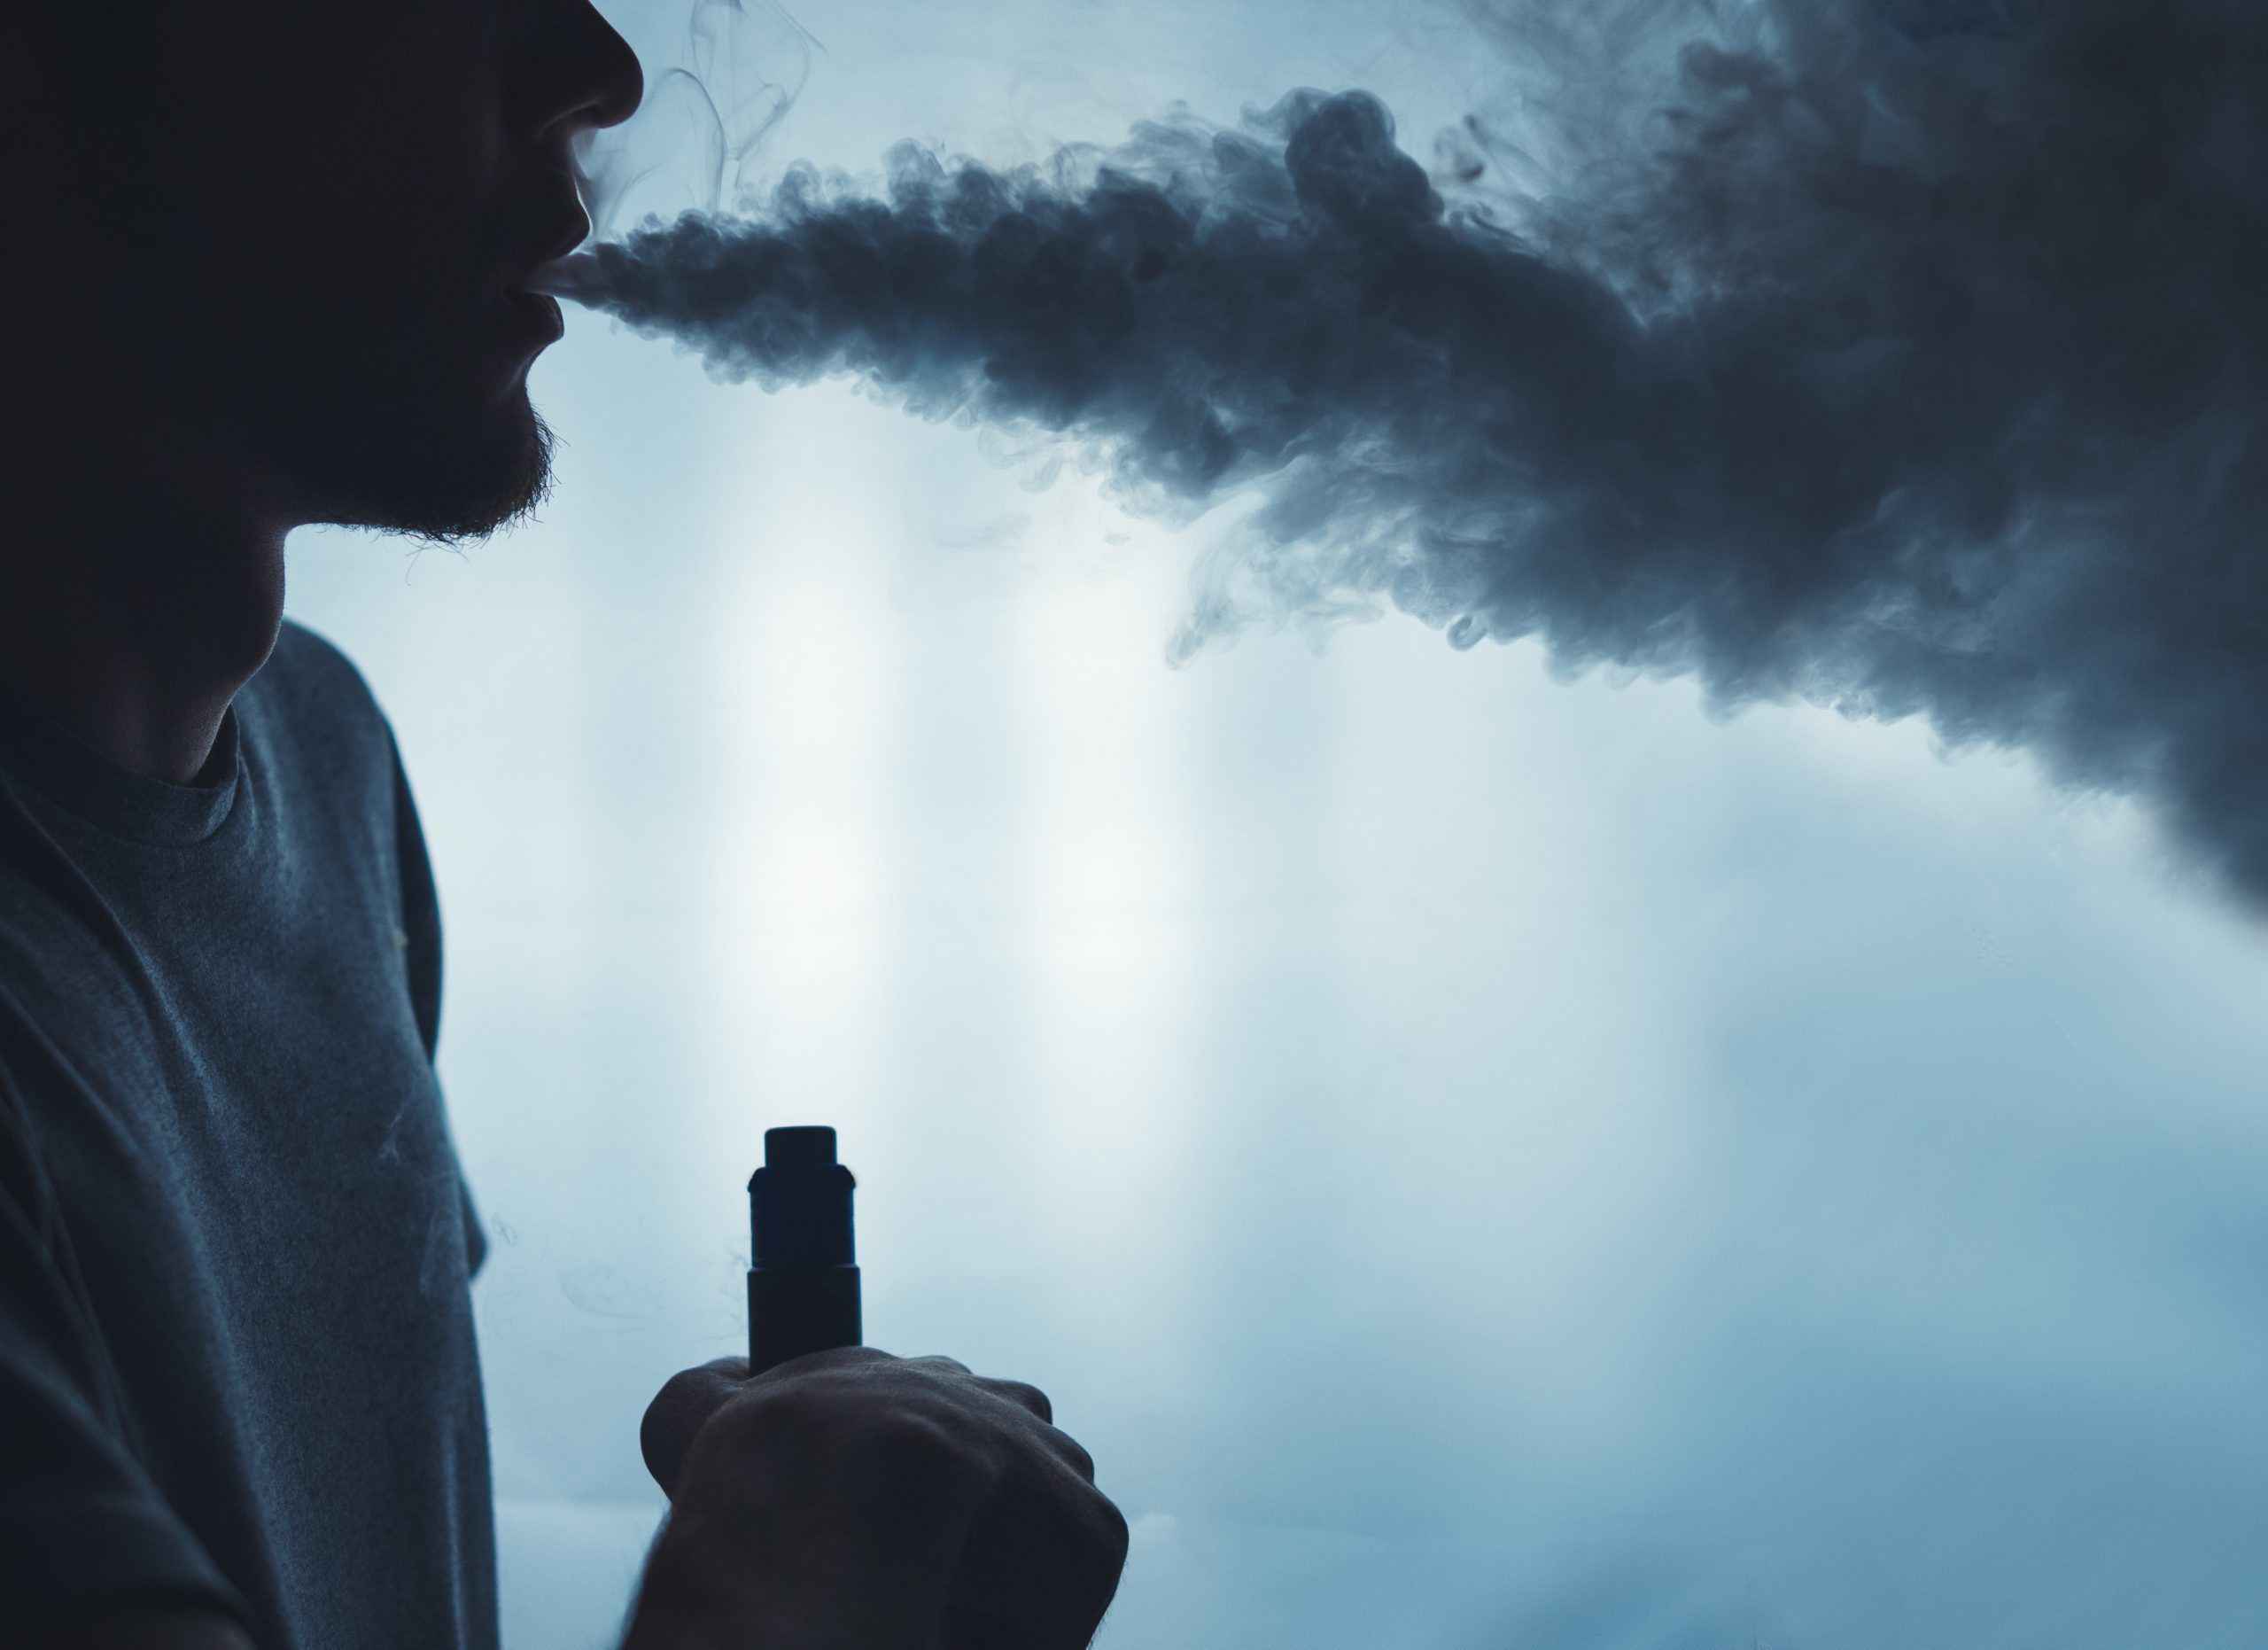 After examining the contents of THC and nicotine vape pens, the vitamin E additive was declared as harmful for people’s lungs. /